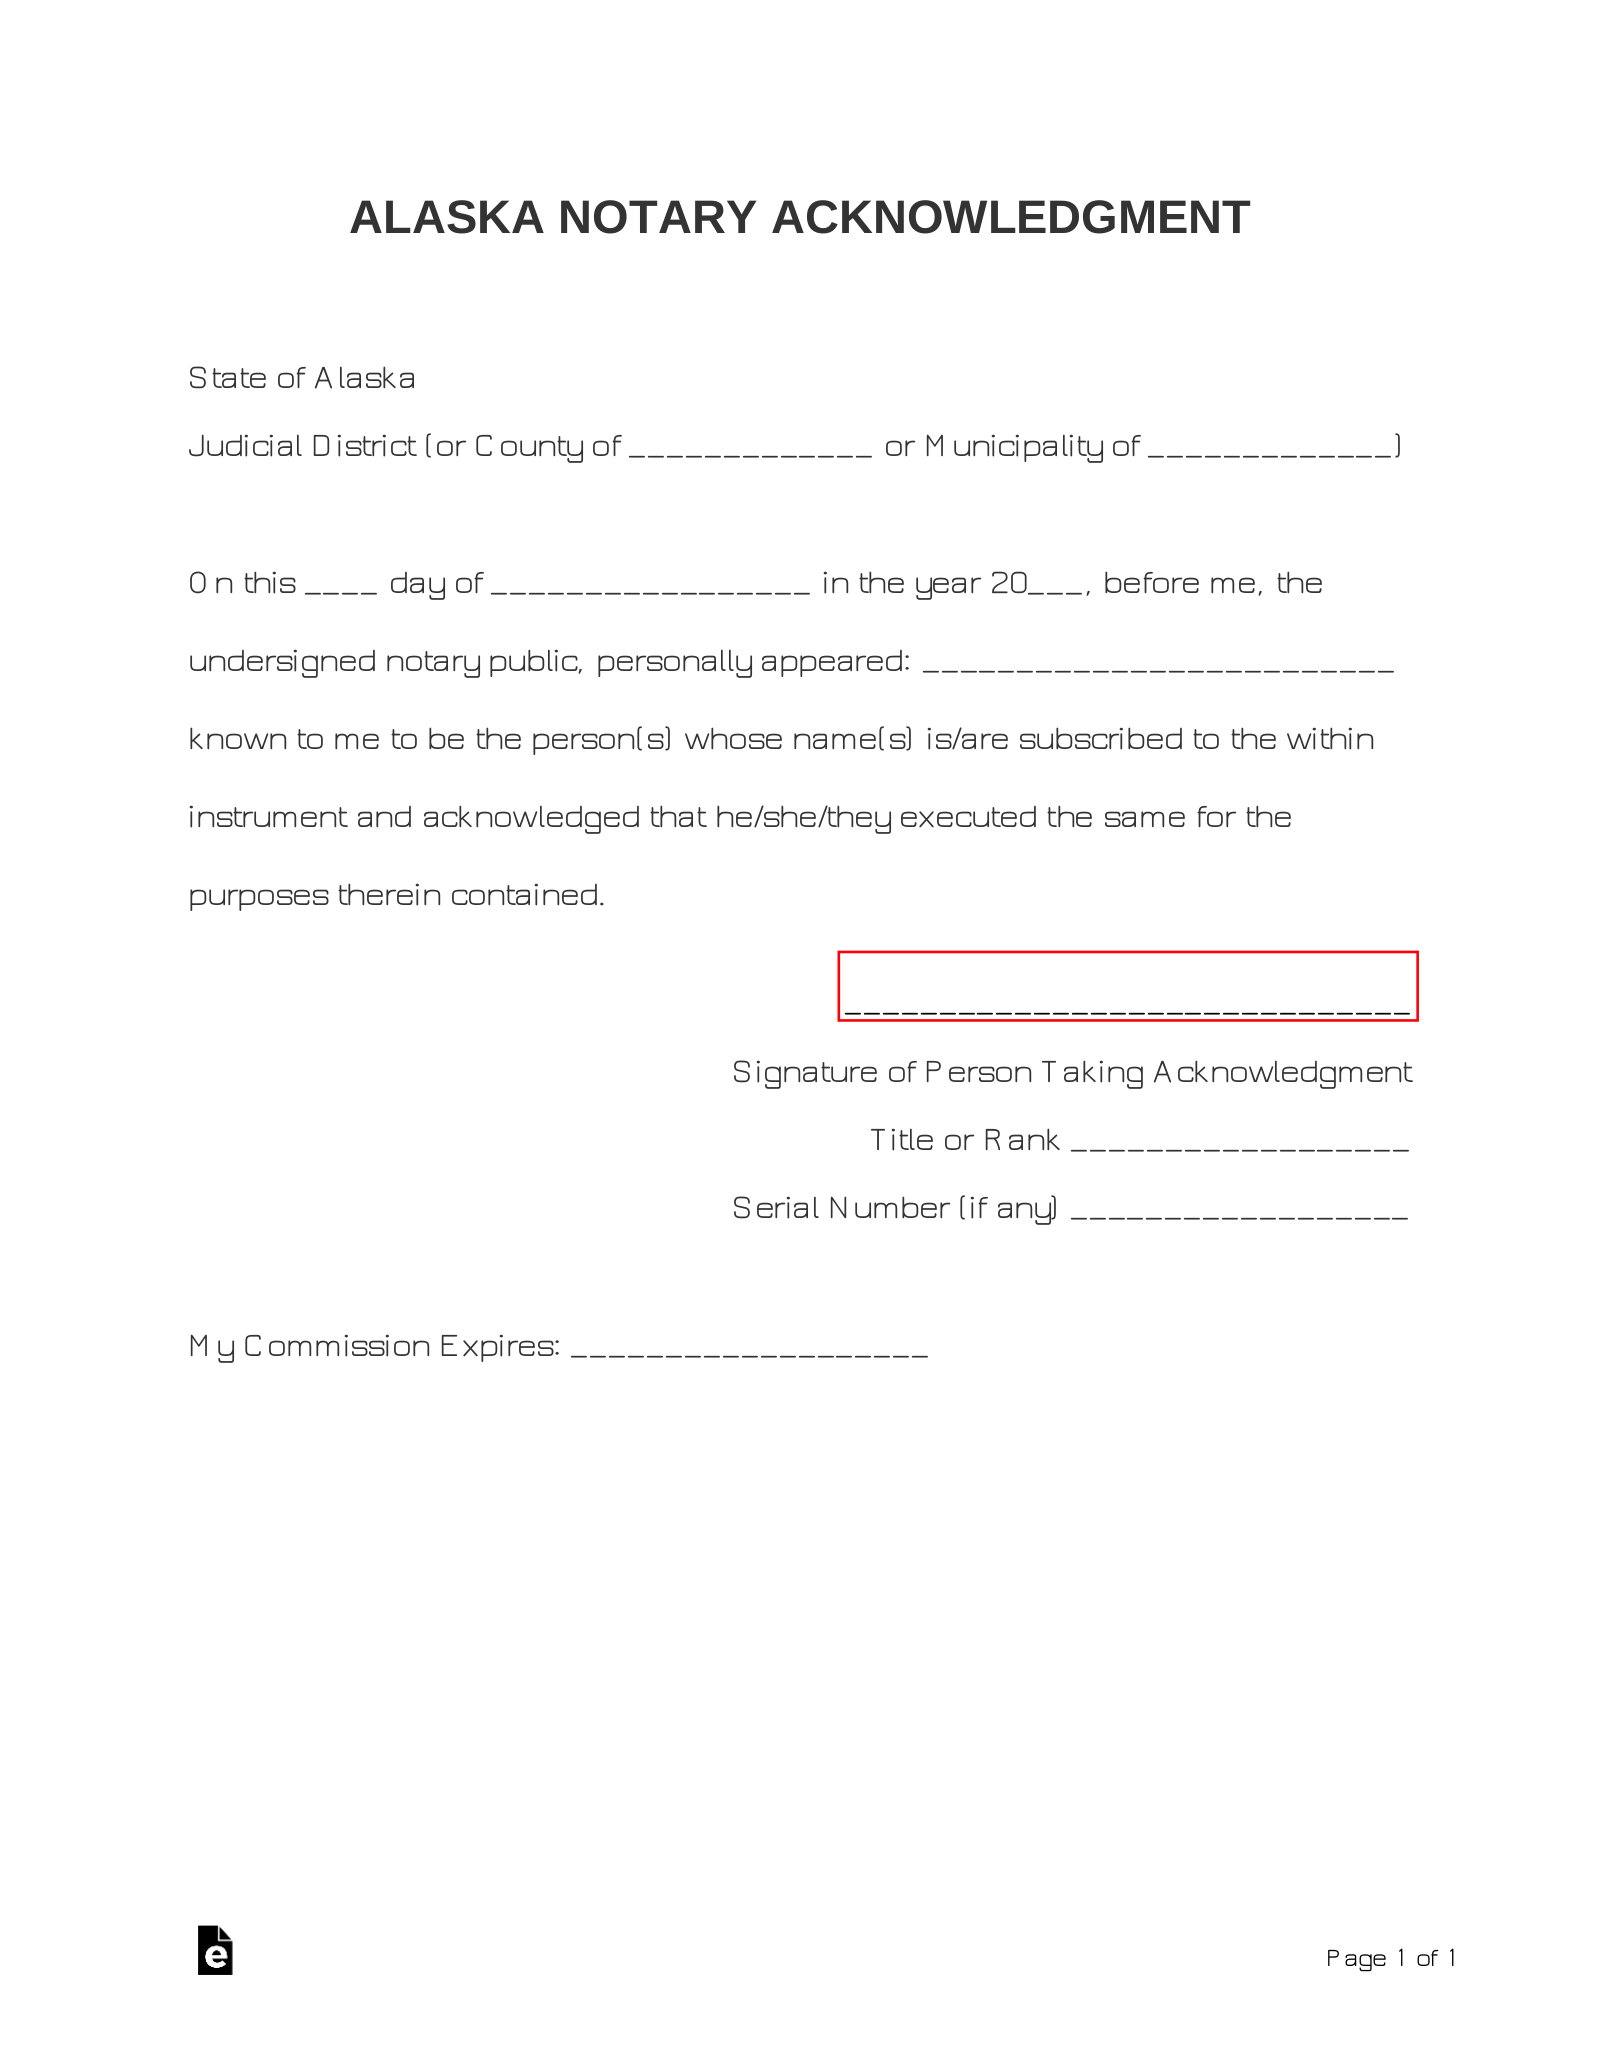 Free Alaska Notary Acknowledgment Form - PDF | Word | eForms – Free